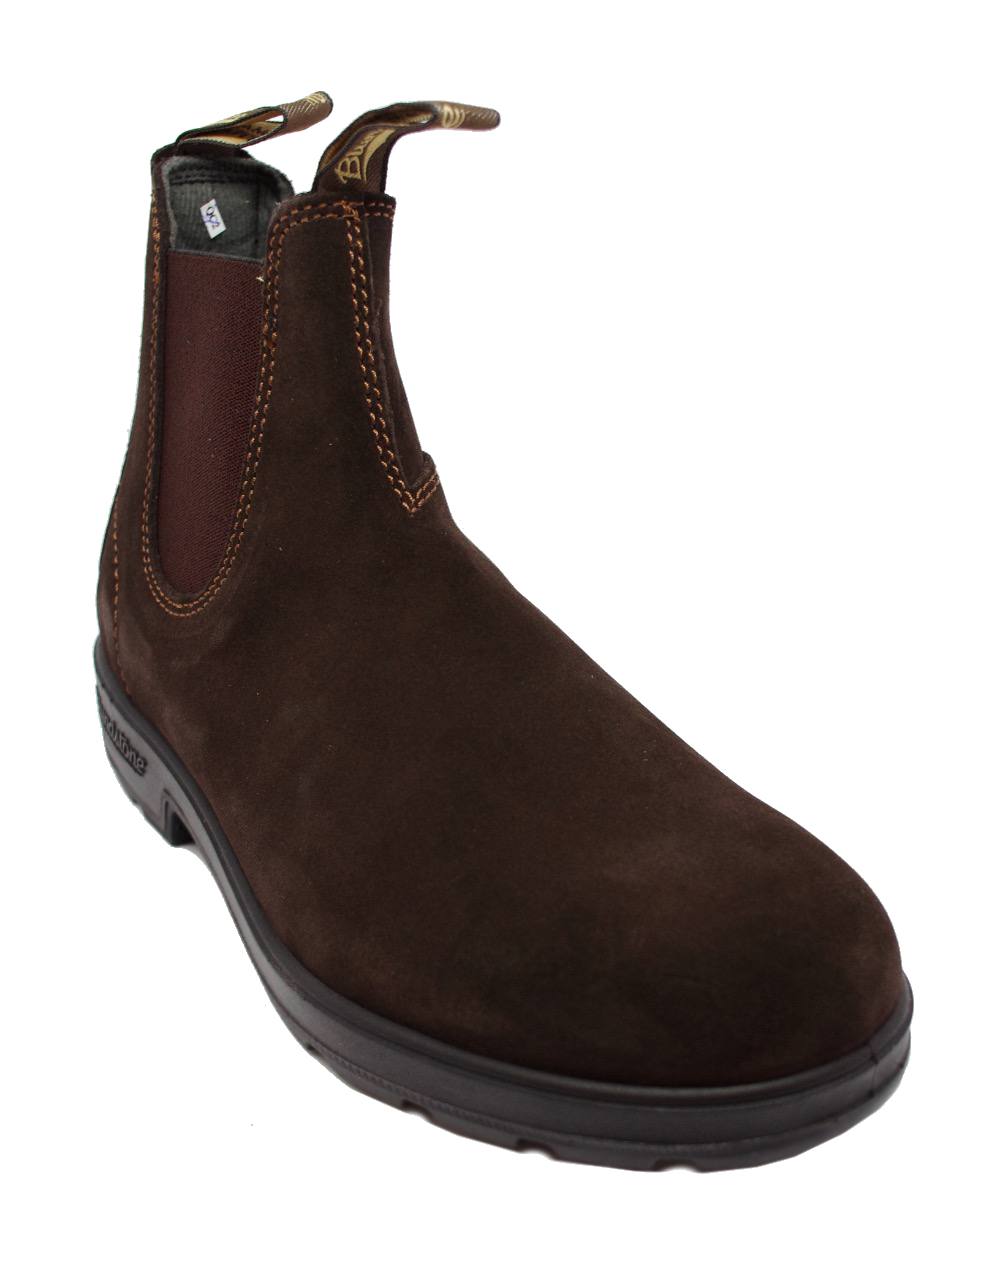 Blundstone 1458 Chelsea Boot in Brown Suede